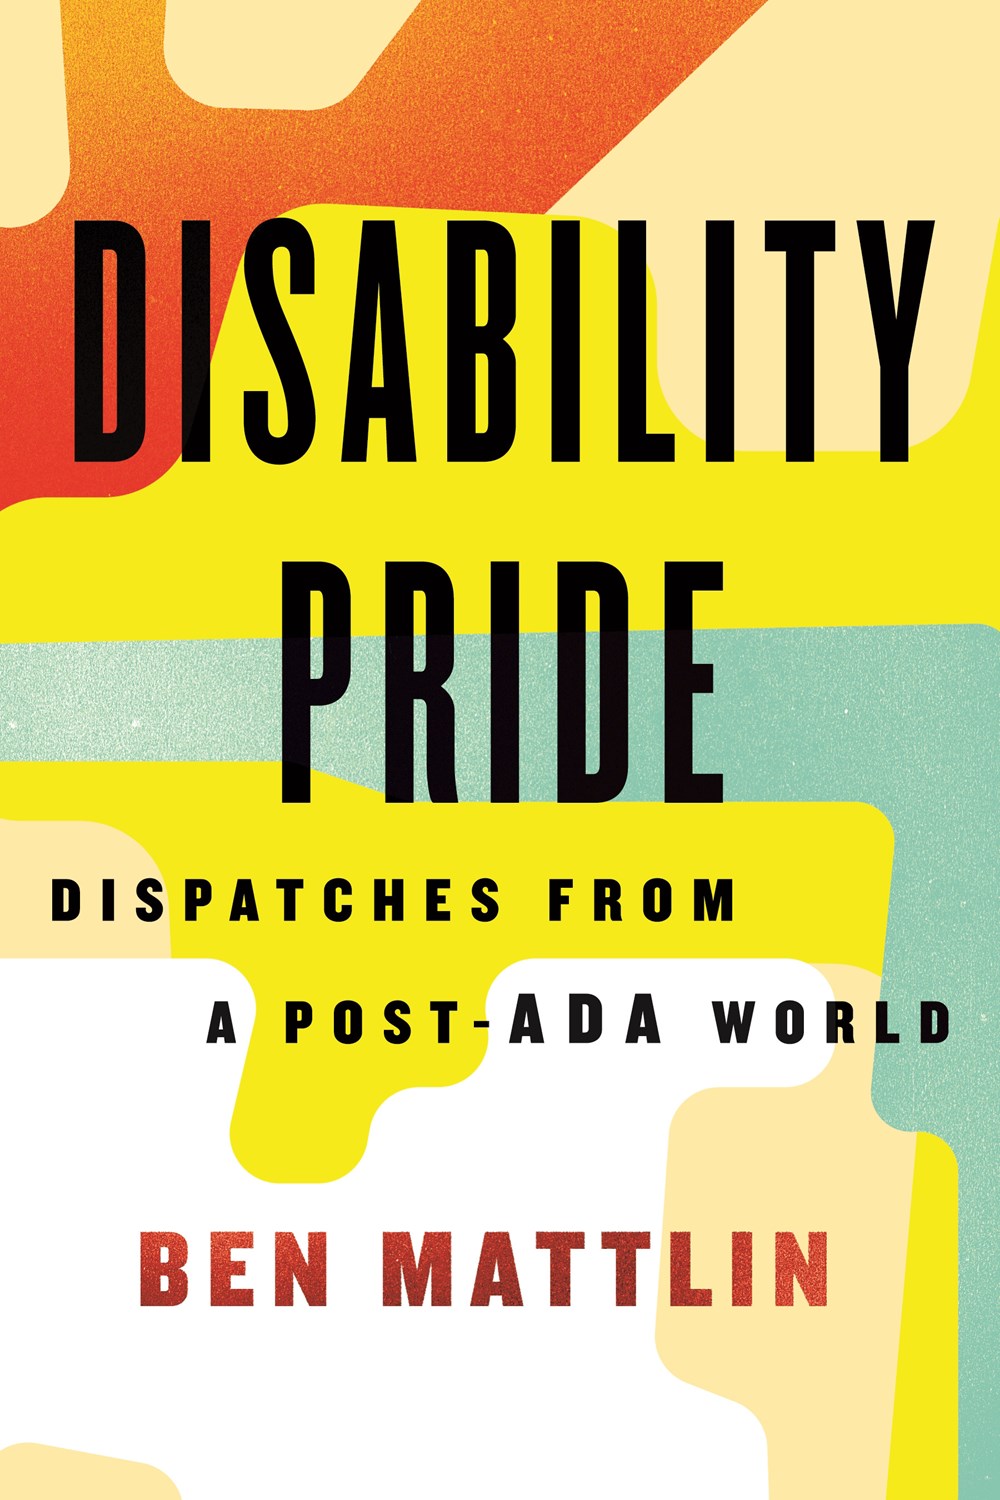 Image of "Disability Pride: Dispatches from a Post-ADA World"